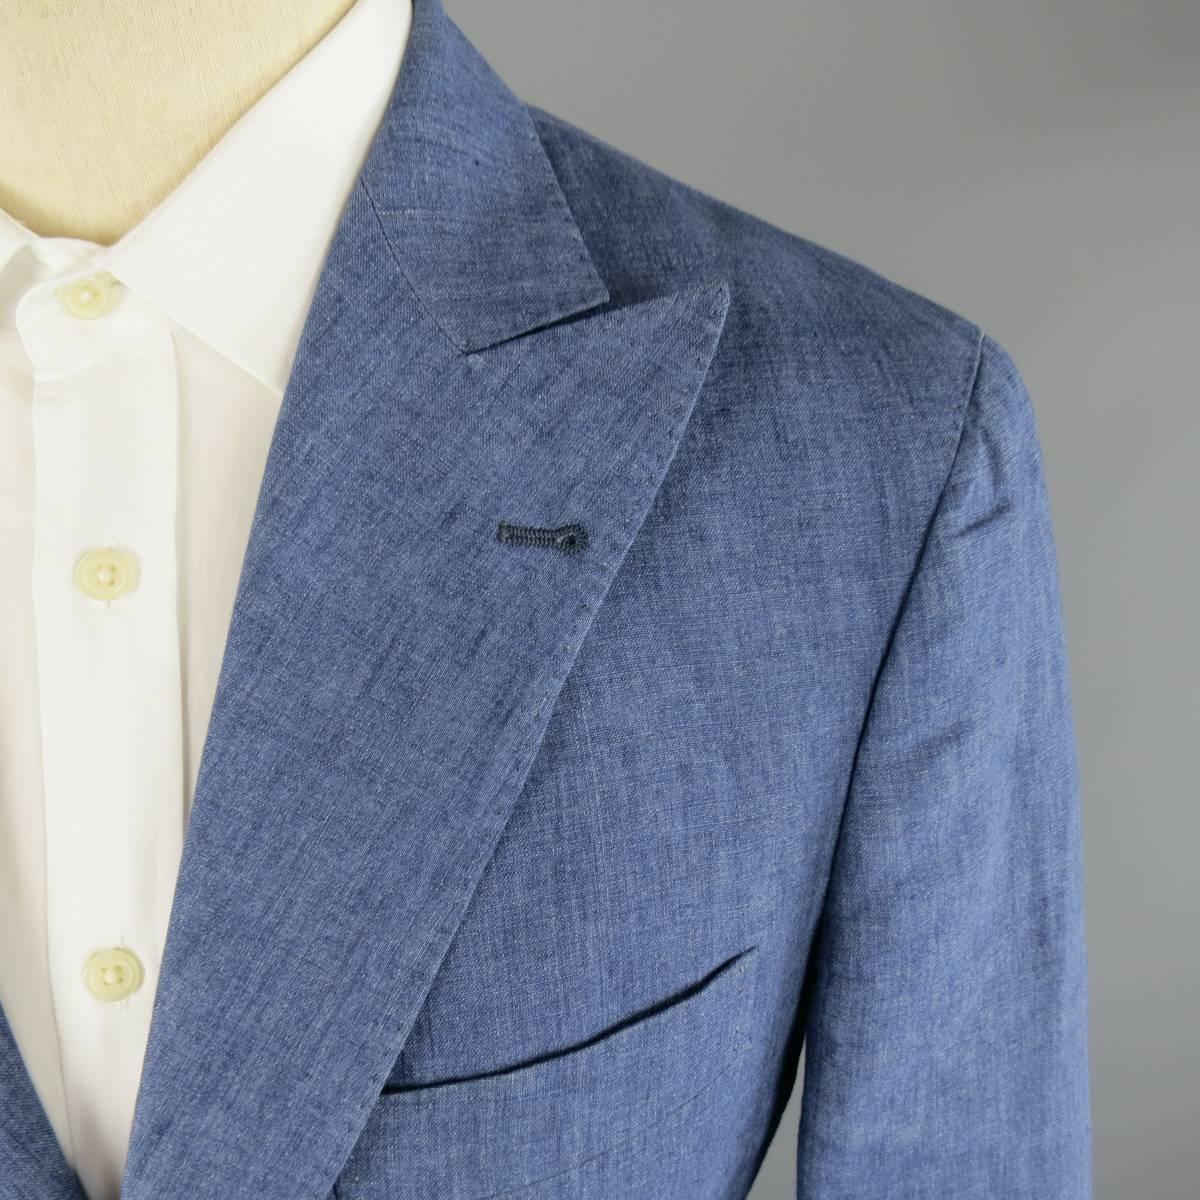 BRUNELLO CUCINELLI Sport Coat consists of linen material in a blue color tone. Designed in a 3 button front, peak lapel collar and 4 button cuff sleeves. Detailed with a top pocket square and bottom patch pockets. Double back vent with half